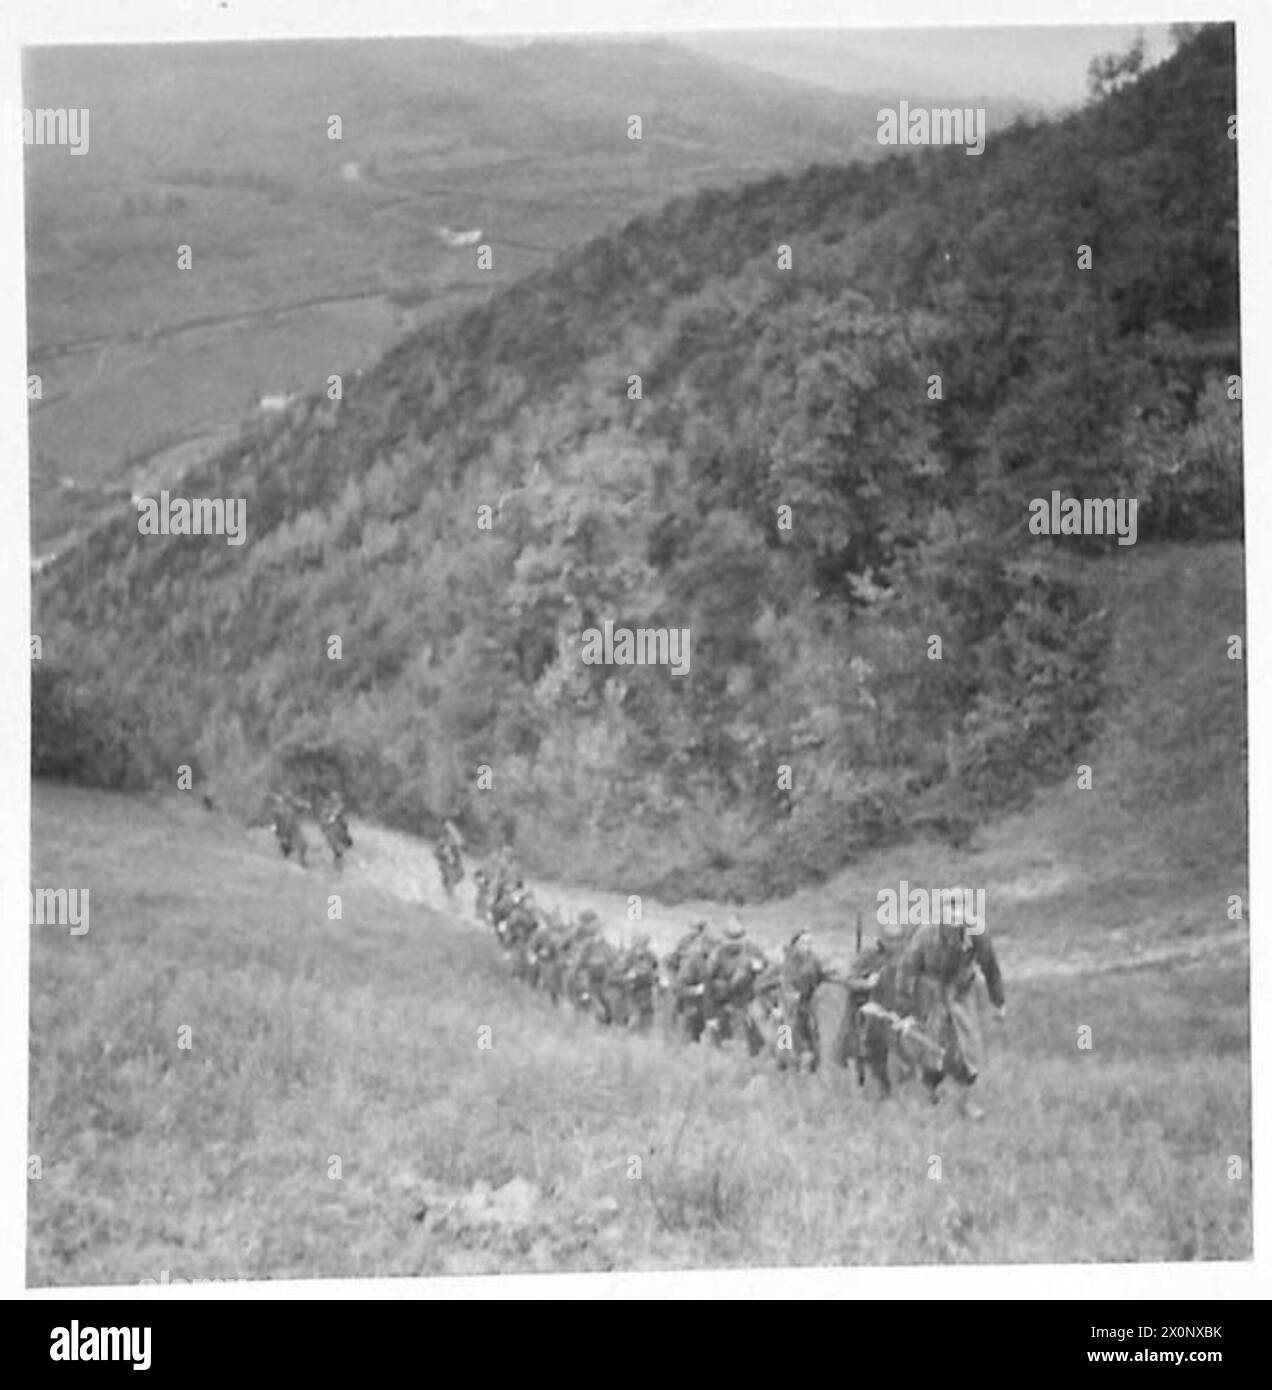 EIGHTH ARMY : BAD ROADS HAMPER SUPPLY TRAFFIC - The axis of advance of 20 Brigade, 10th Indian Division is only a very bad second class road, and two lines of traffice can barely pass. Photographic negative , British Army Stock Photo